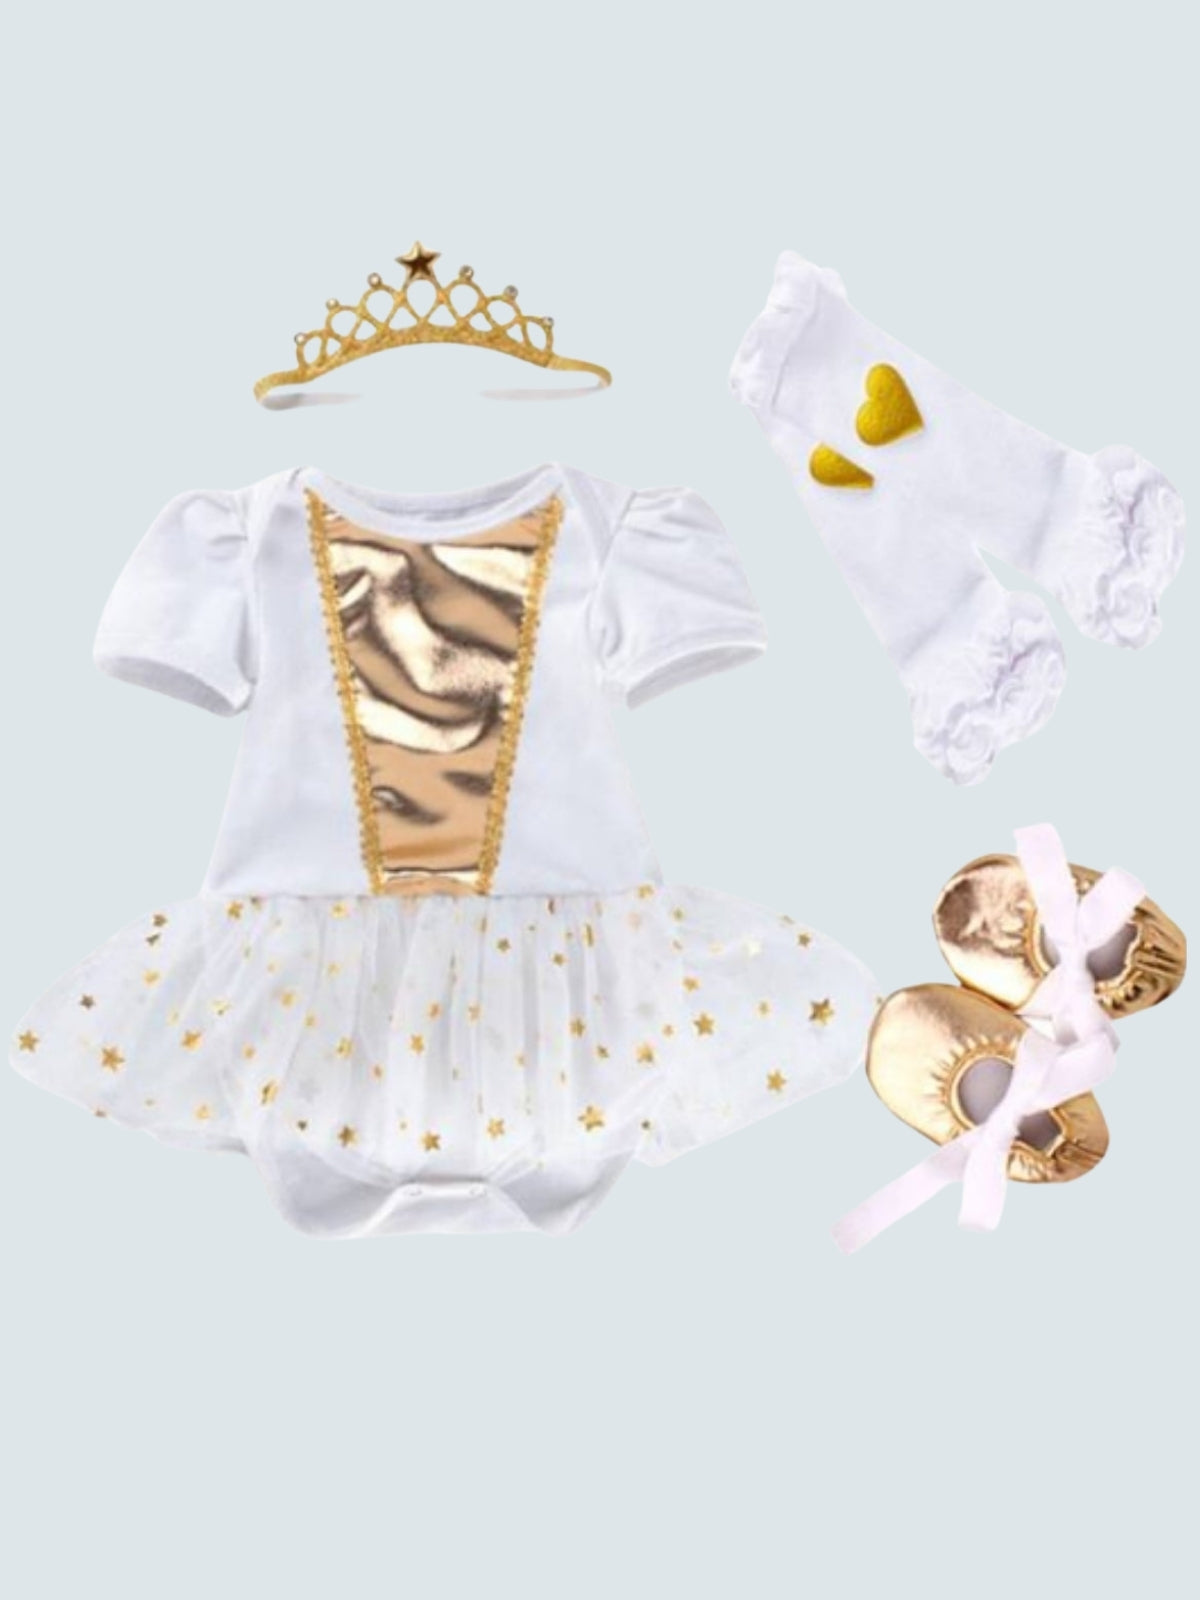 Baby Little Princess Onesie with Tiara Headband, Socks and Matching Shoes Set